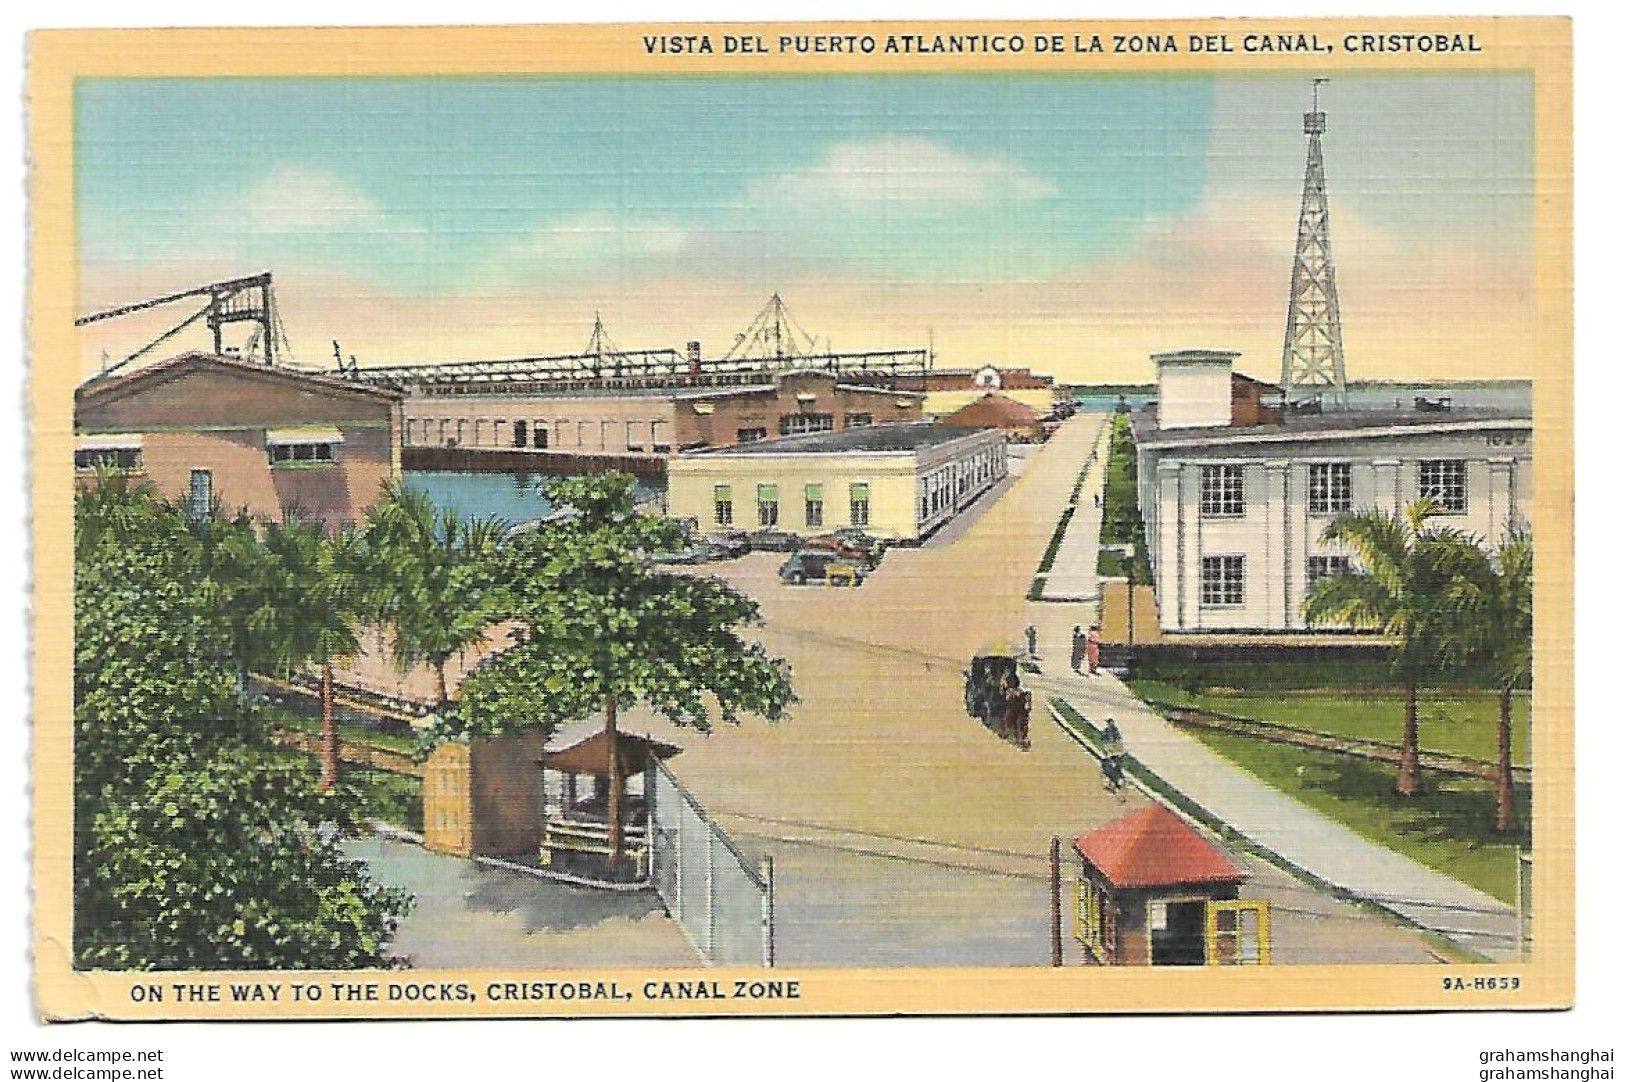 6 postcards lot Panama Canal & Canal Zone construction Miroflores & Pedro Miguel locks palace Christobal docks unposted